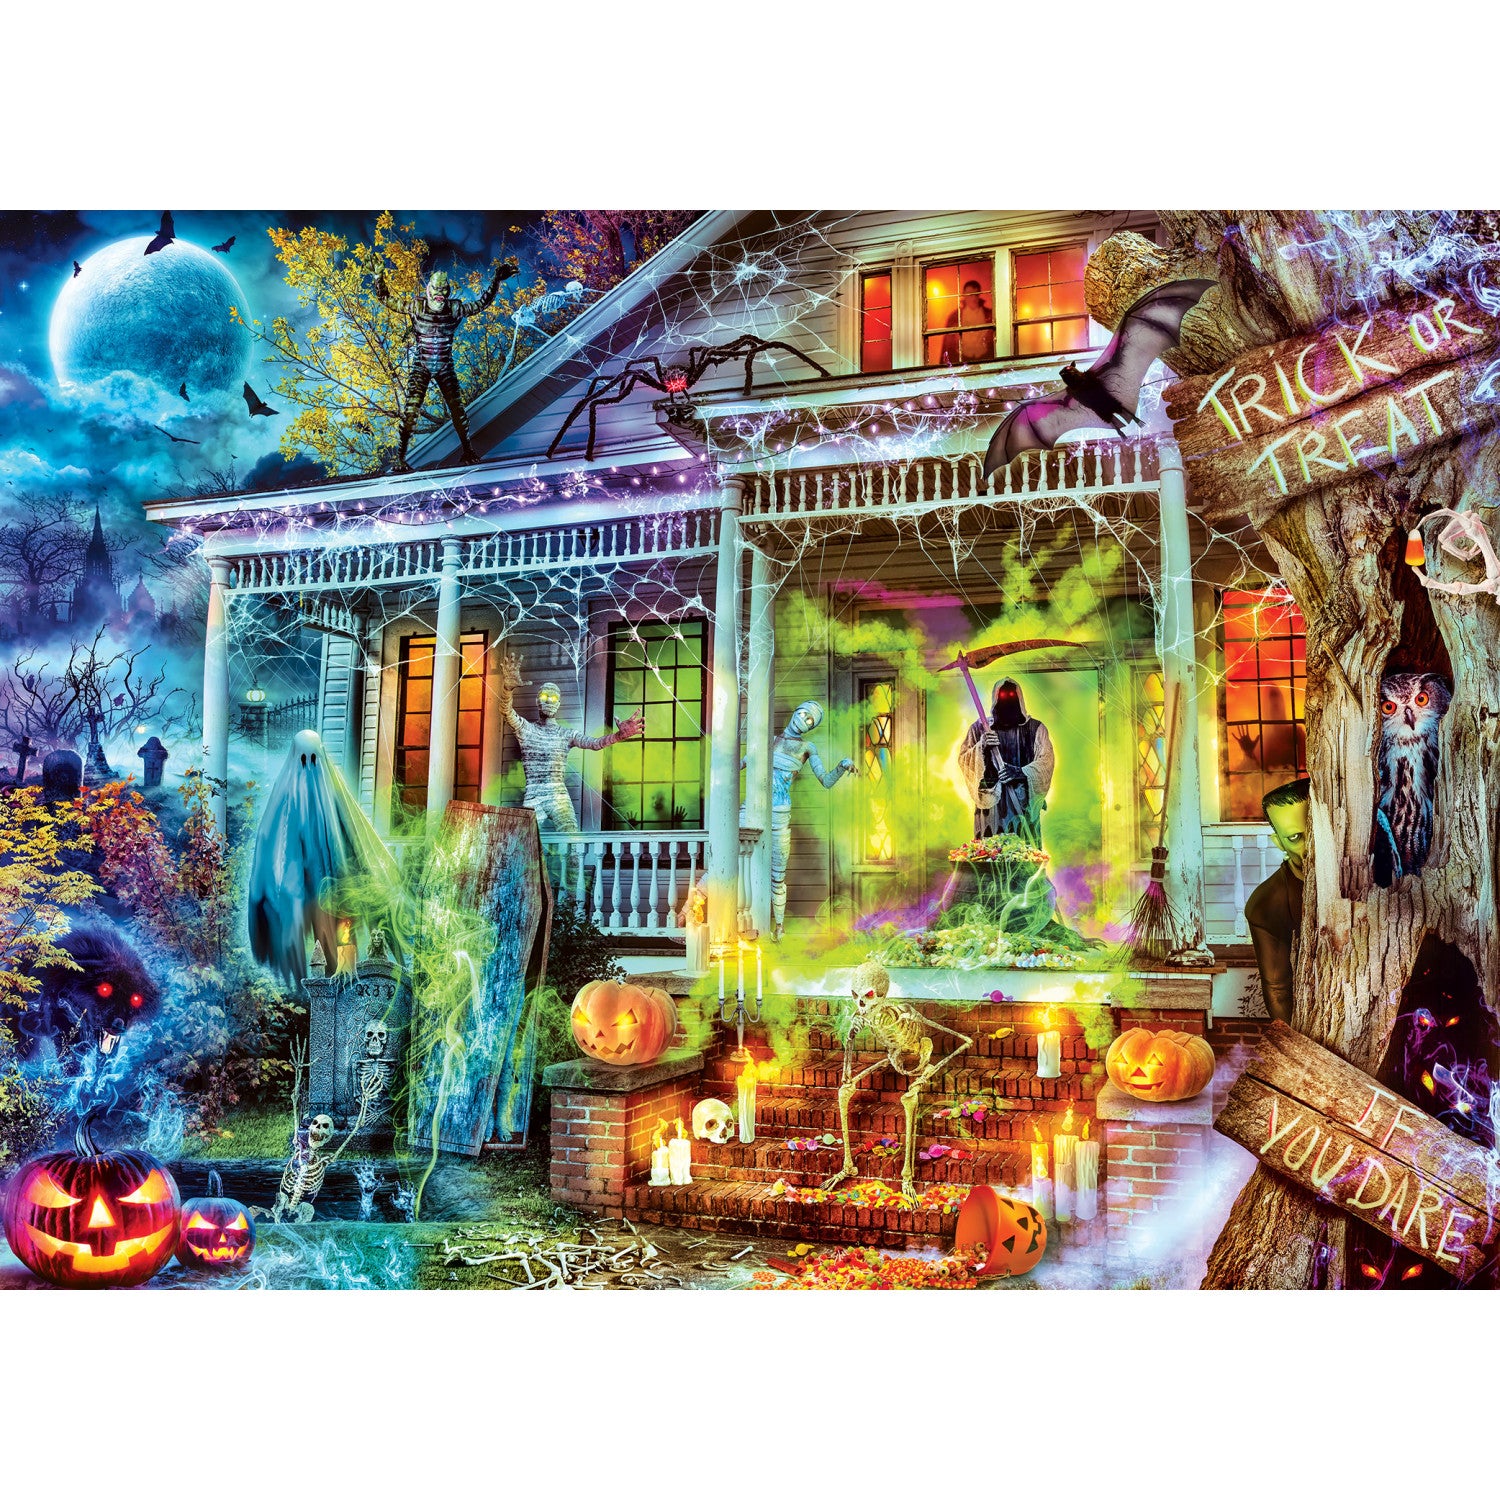 Glow in the Dark Halloween - If You Dare 1000 Piece Puzzle